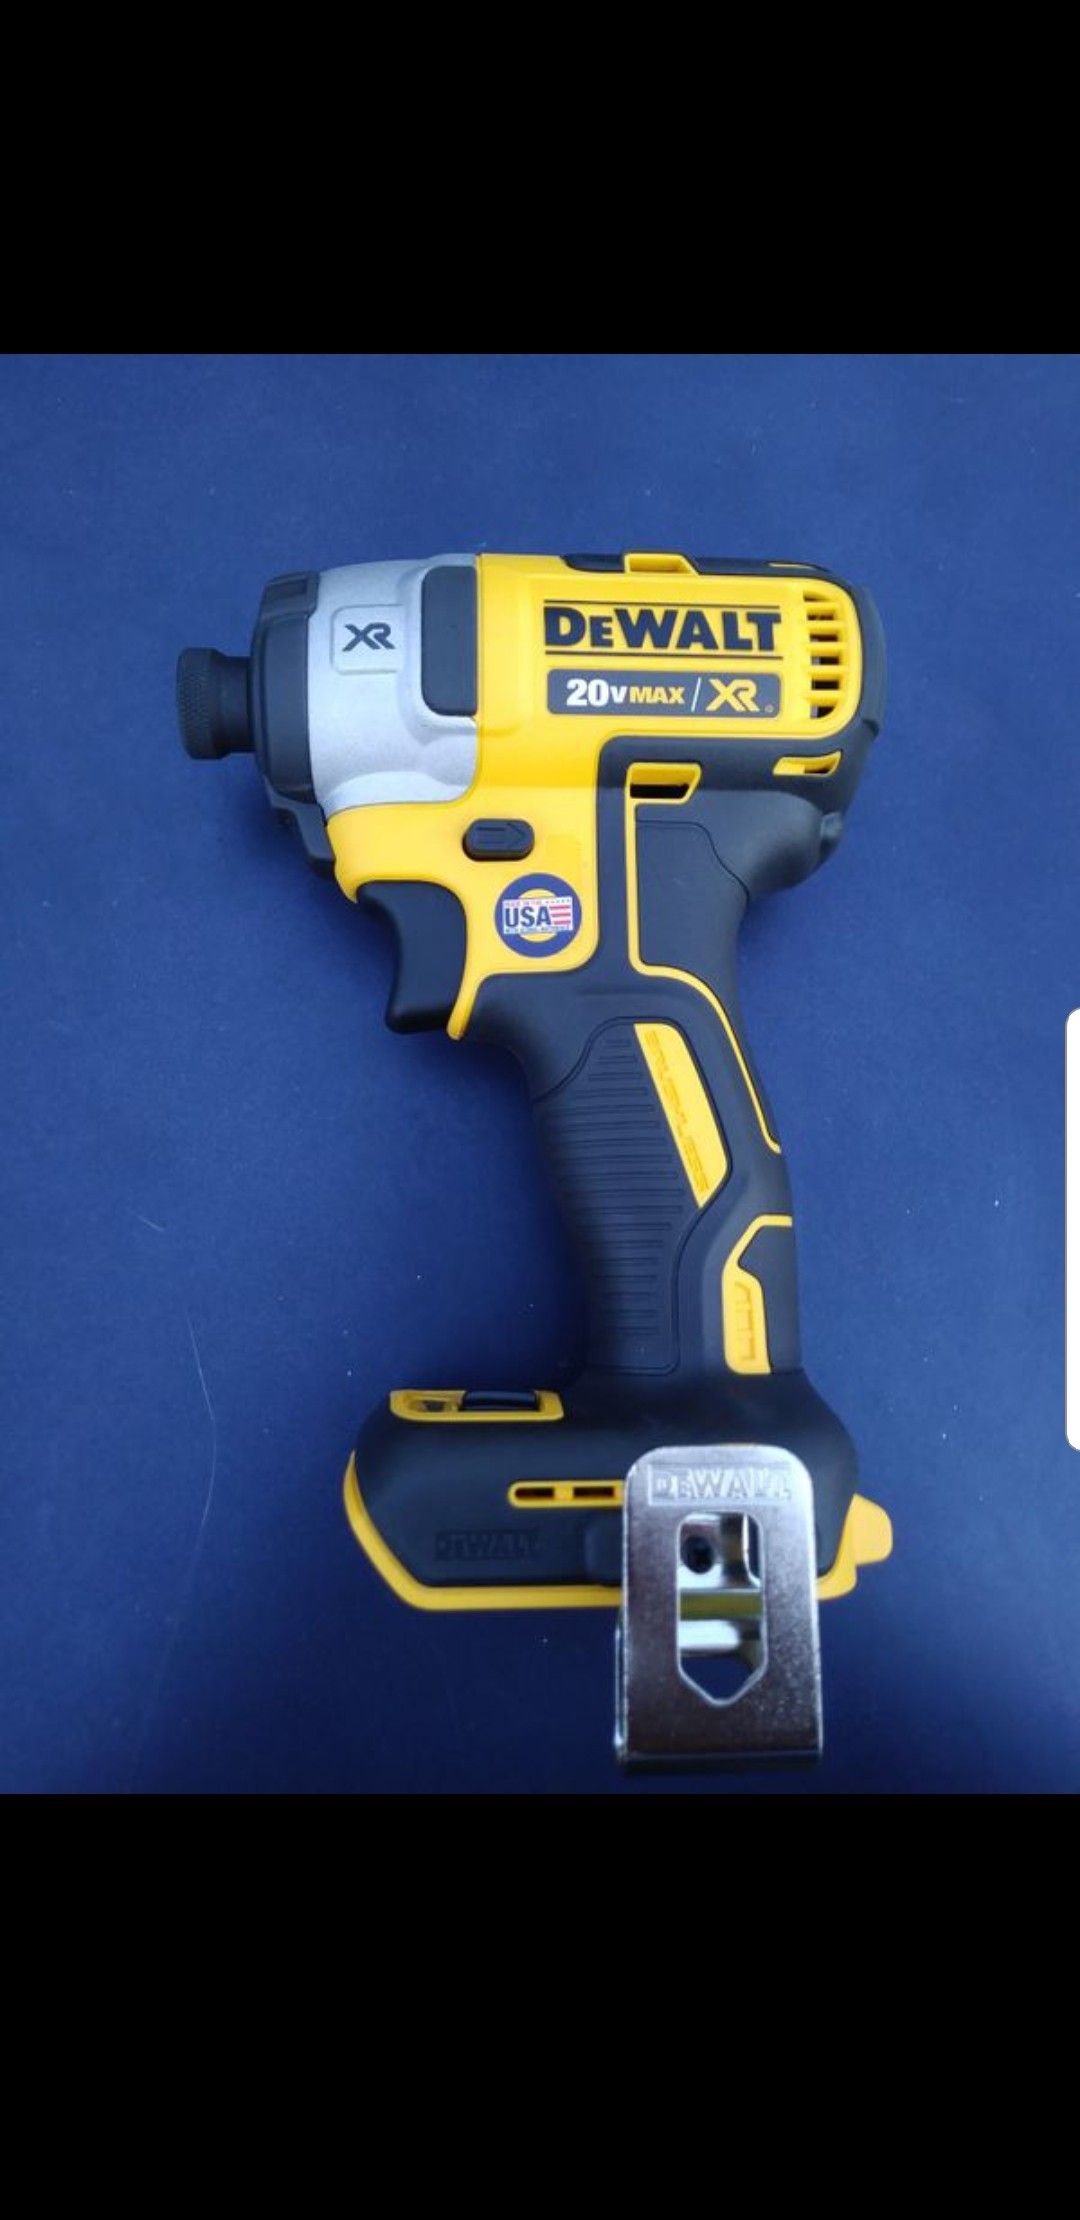 DeWalt xr brushless 3 speed impact driver. Brand new. No battery or charge